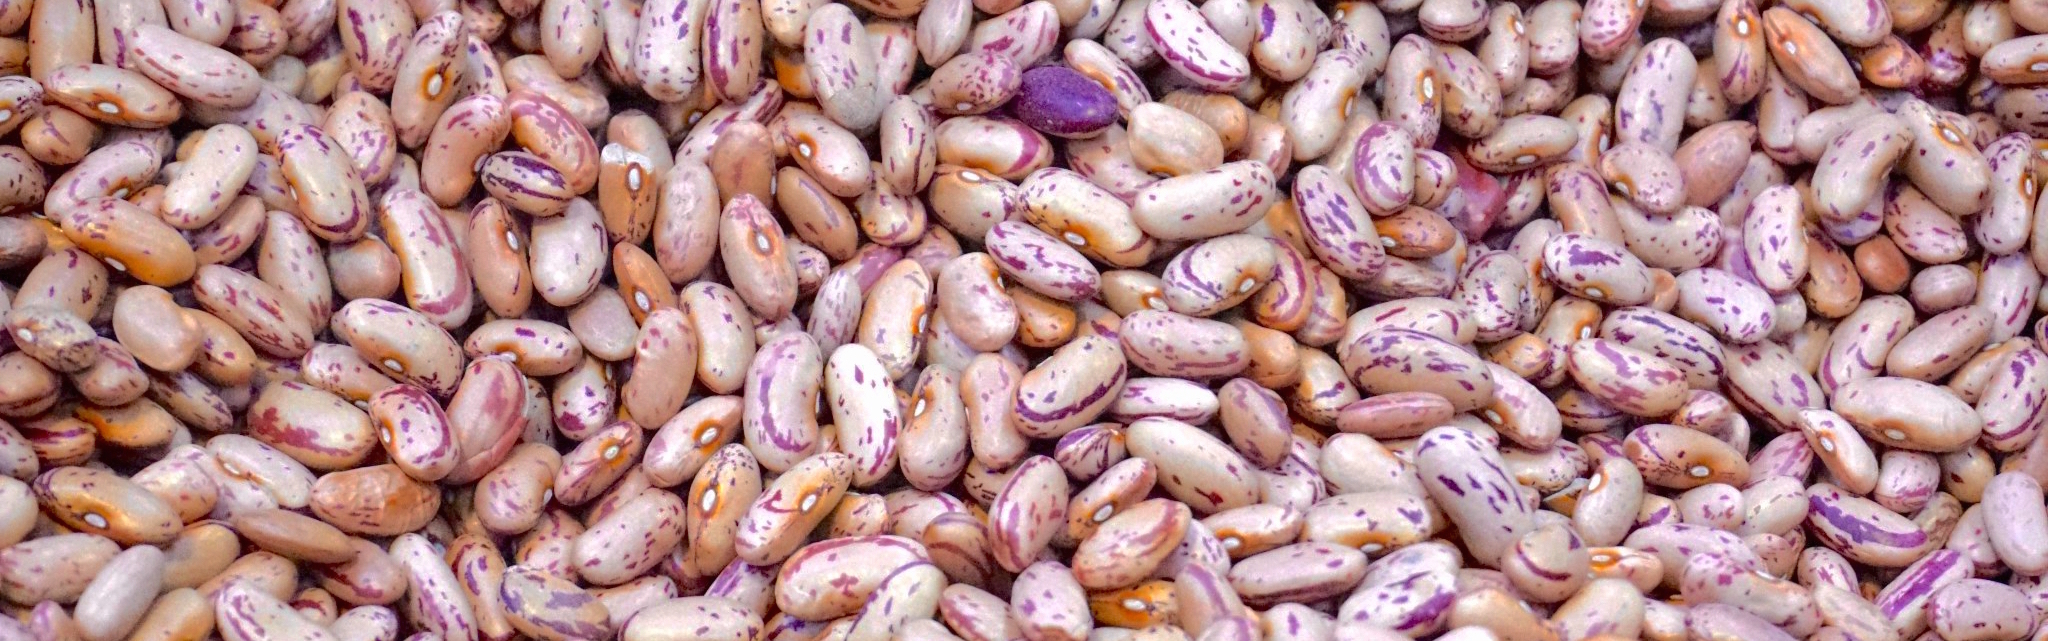 Replacing beef with beans could save the planet, because people farts are better than cow farts